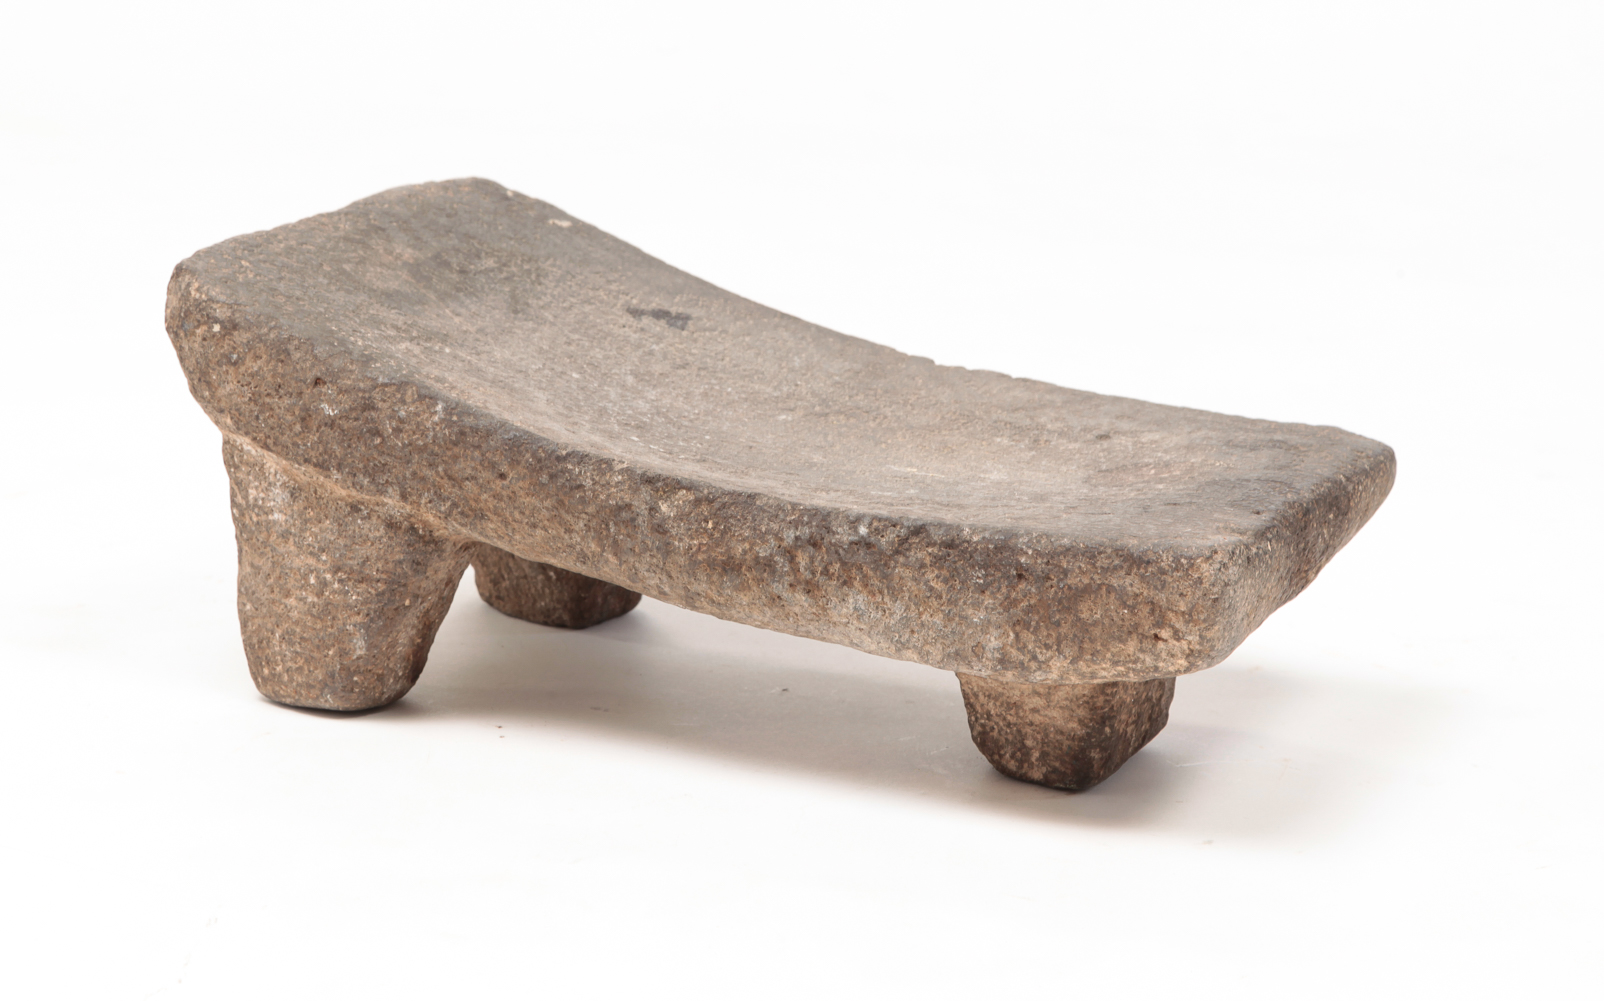 STONE METATE. South or Central America.